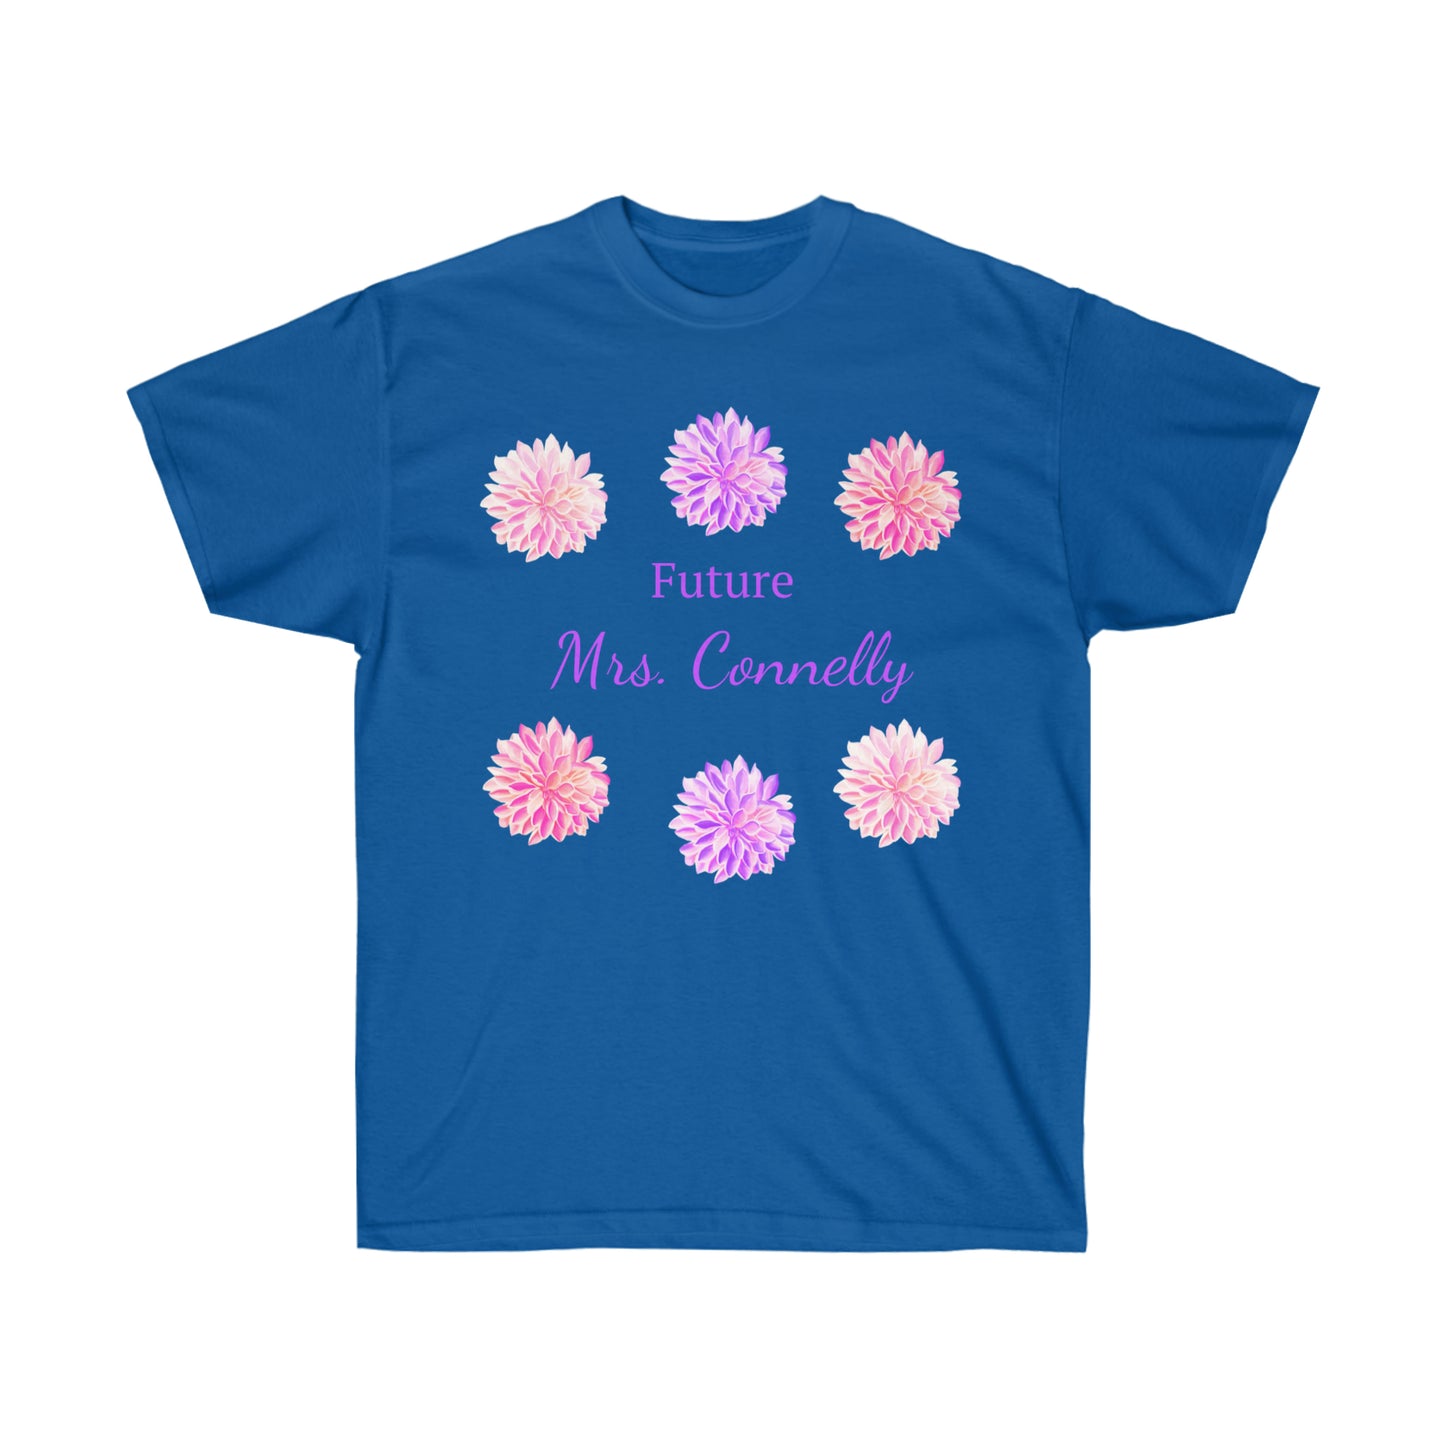 Future Mrs. Connelly Unisex Ultra Cotton Tee